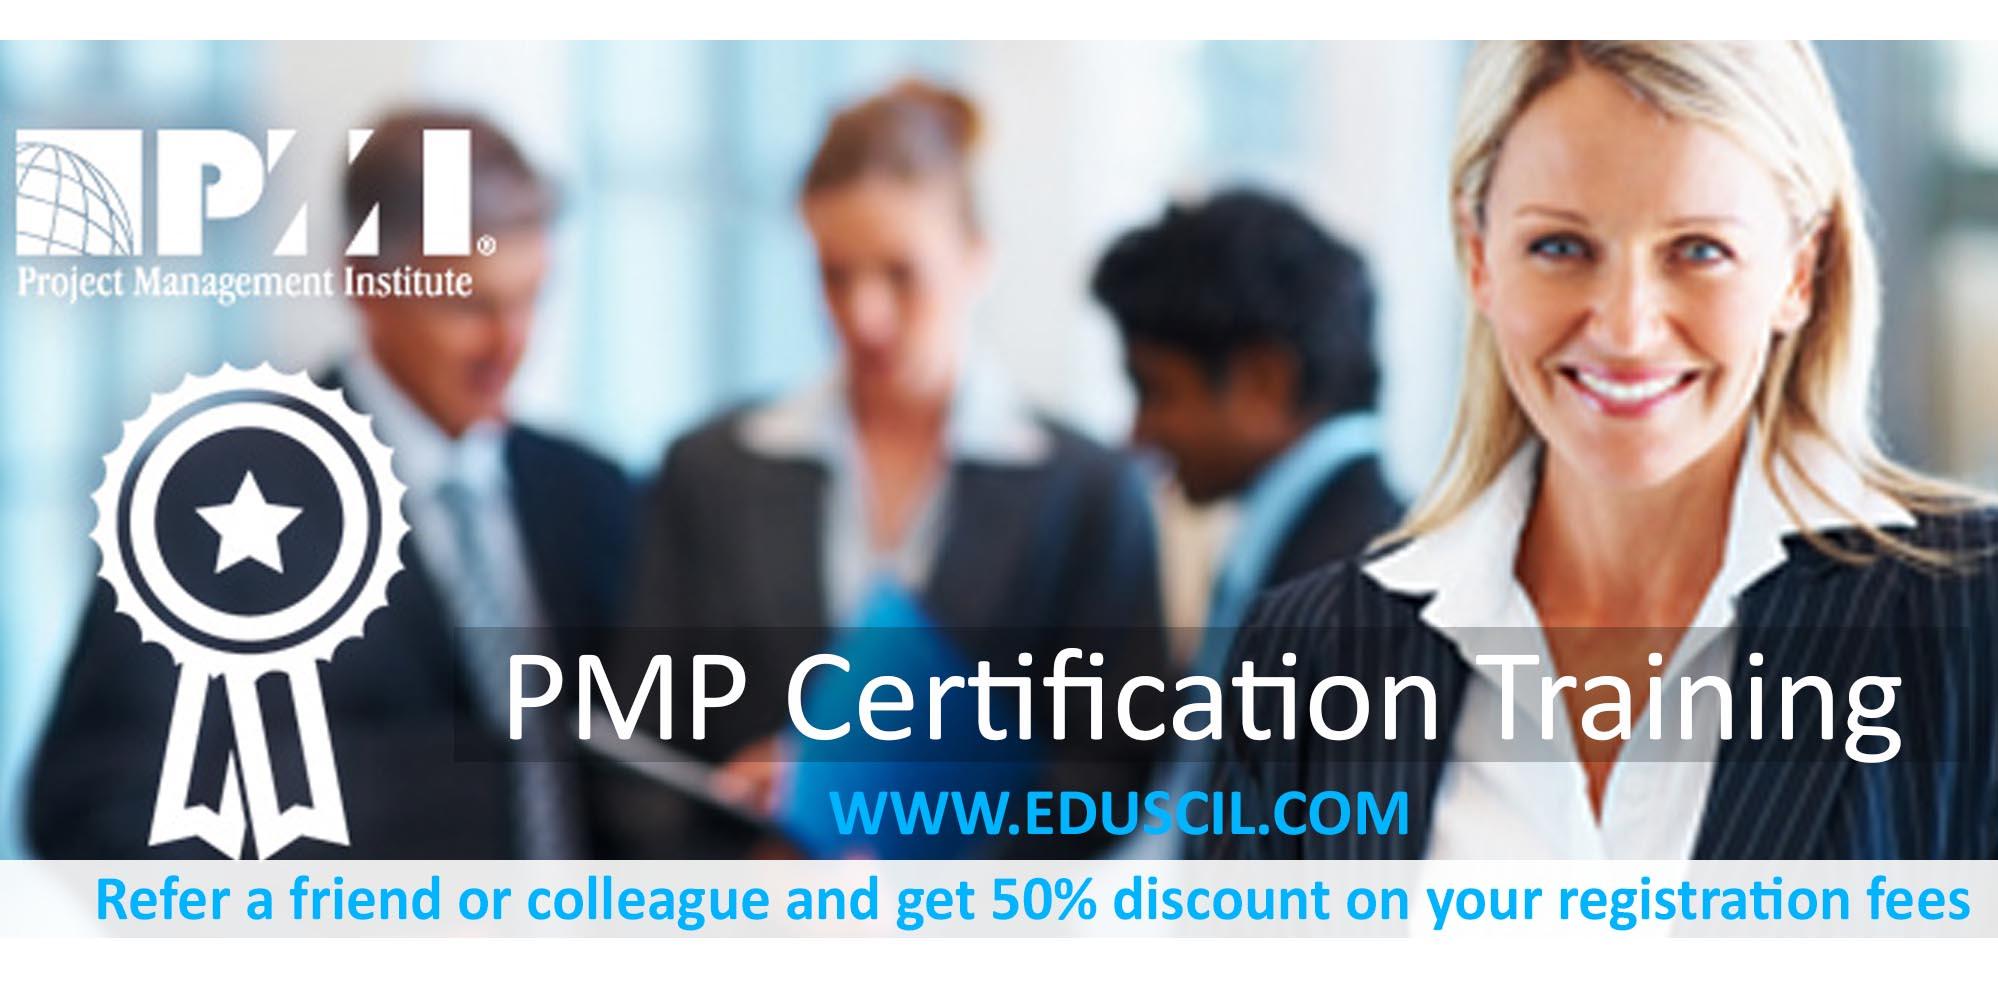 Project Management Professional (PMP) Boot Camp in Carrollton, TX-USA|Eduscil